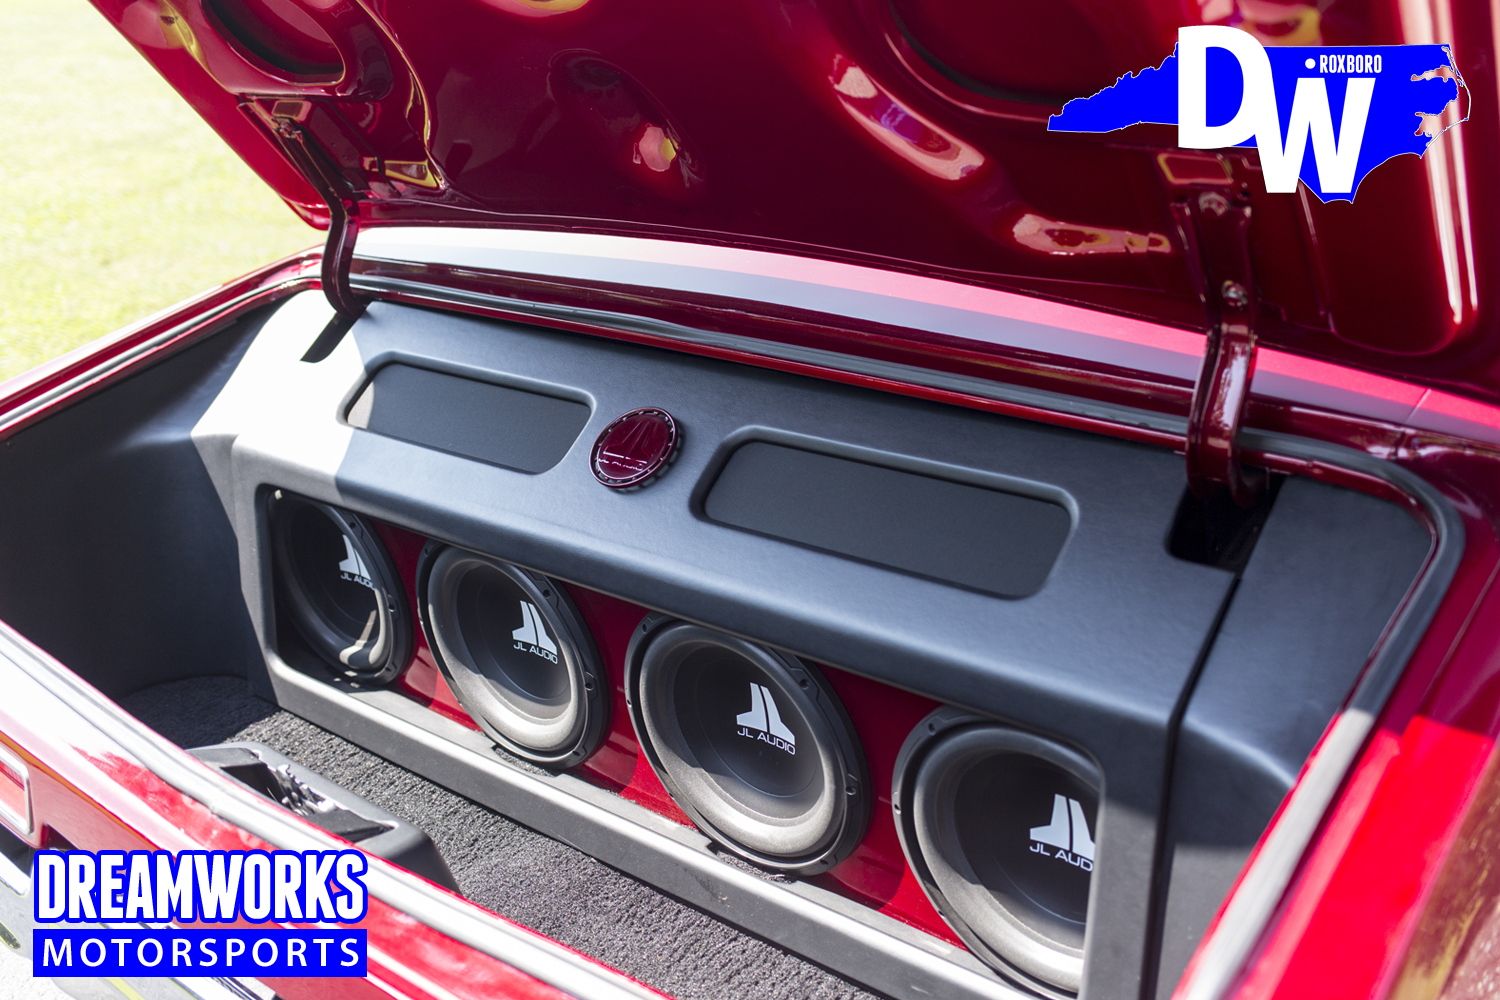 Donk-on-Forgiatos-With-JL-Audio-System-by-Dreamworksmotorsports-9.jpg